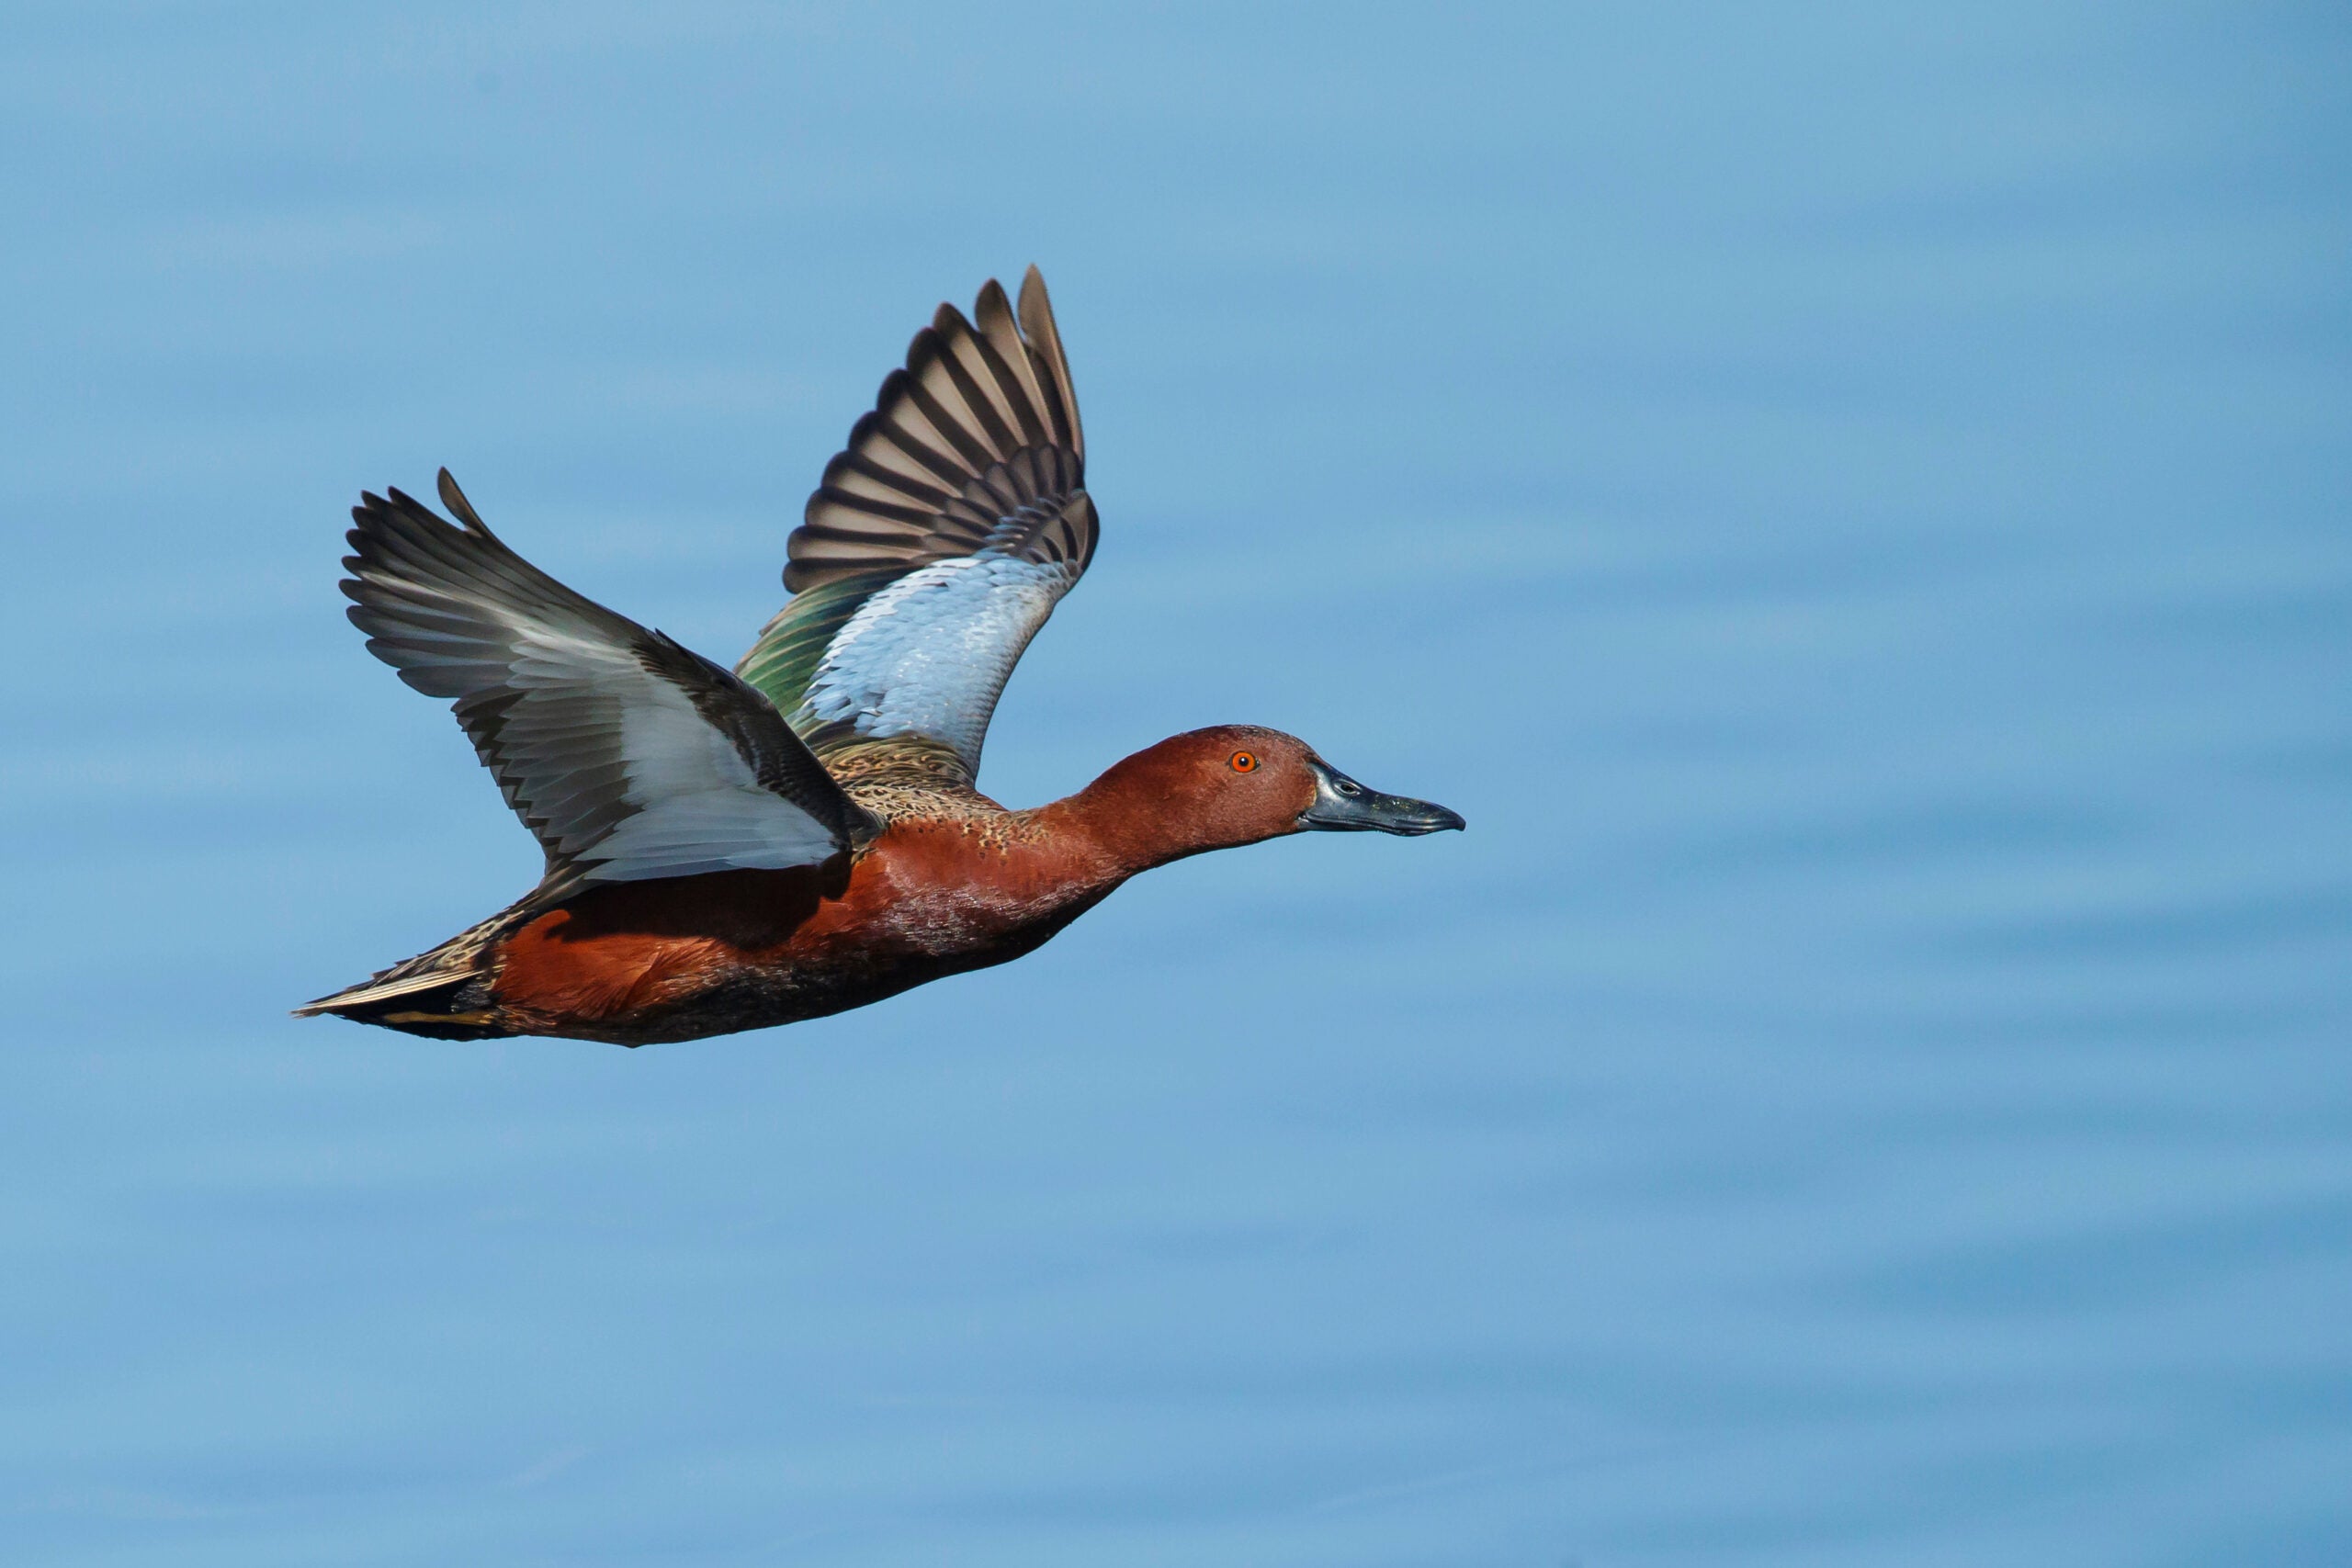 Drake cinnamon teal flowing low above a lake's blue surface